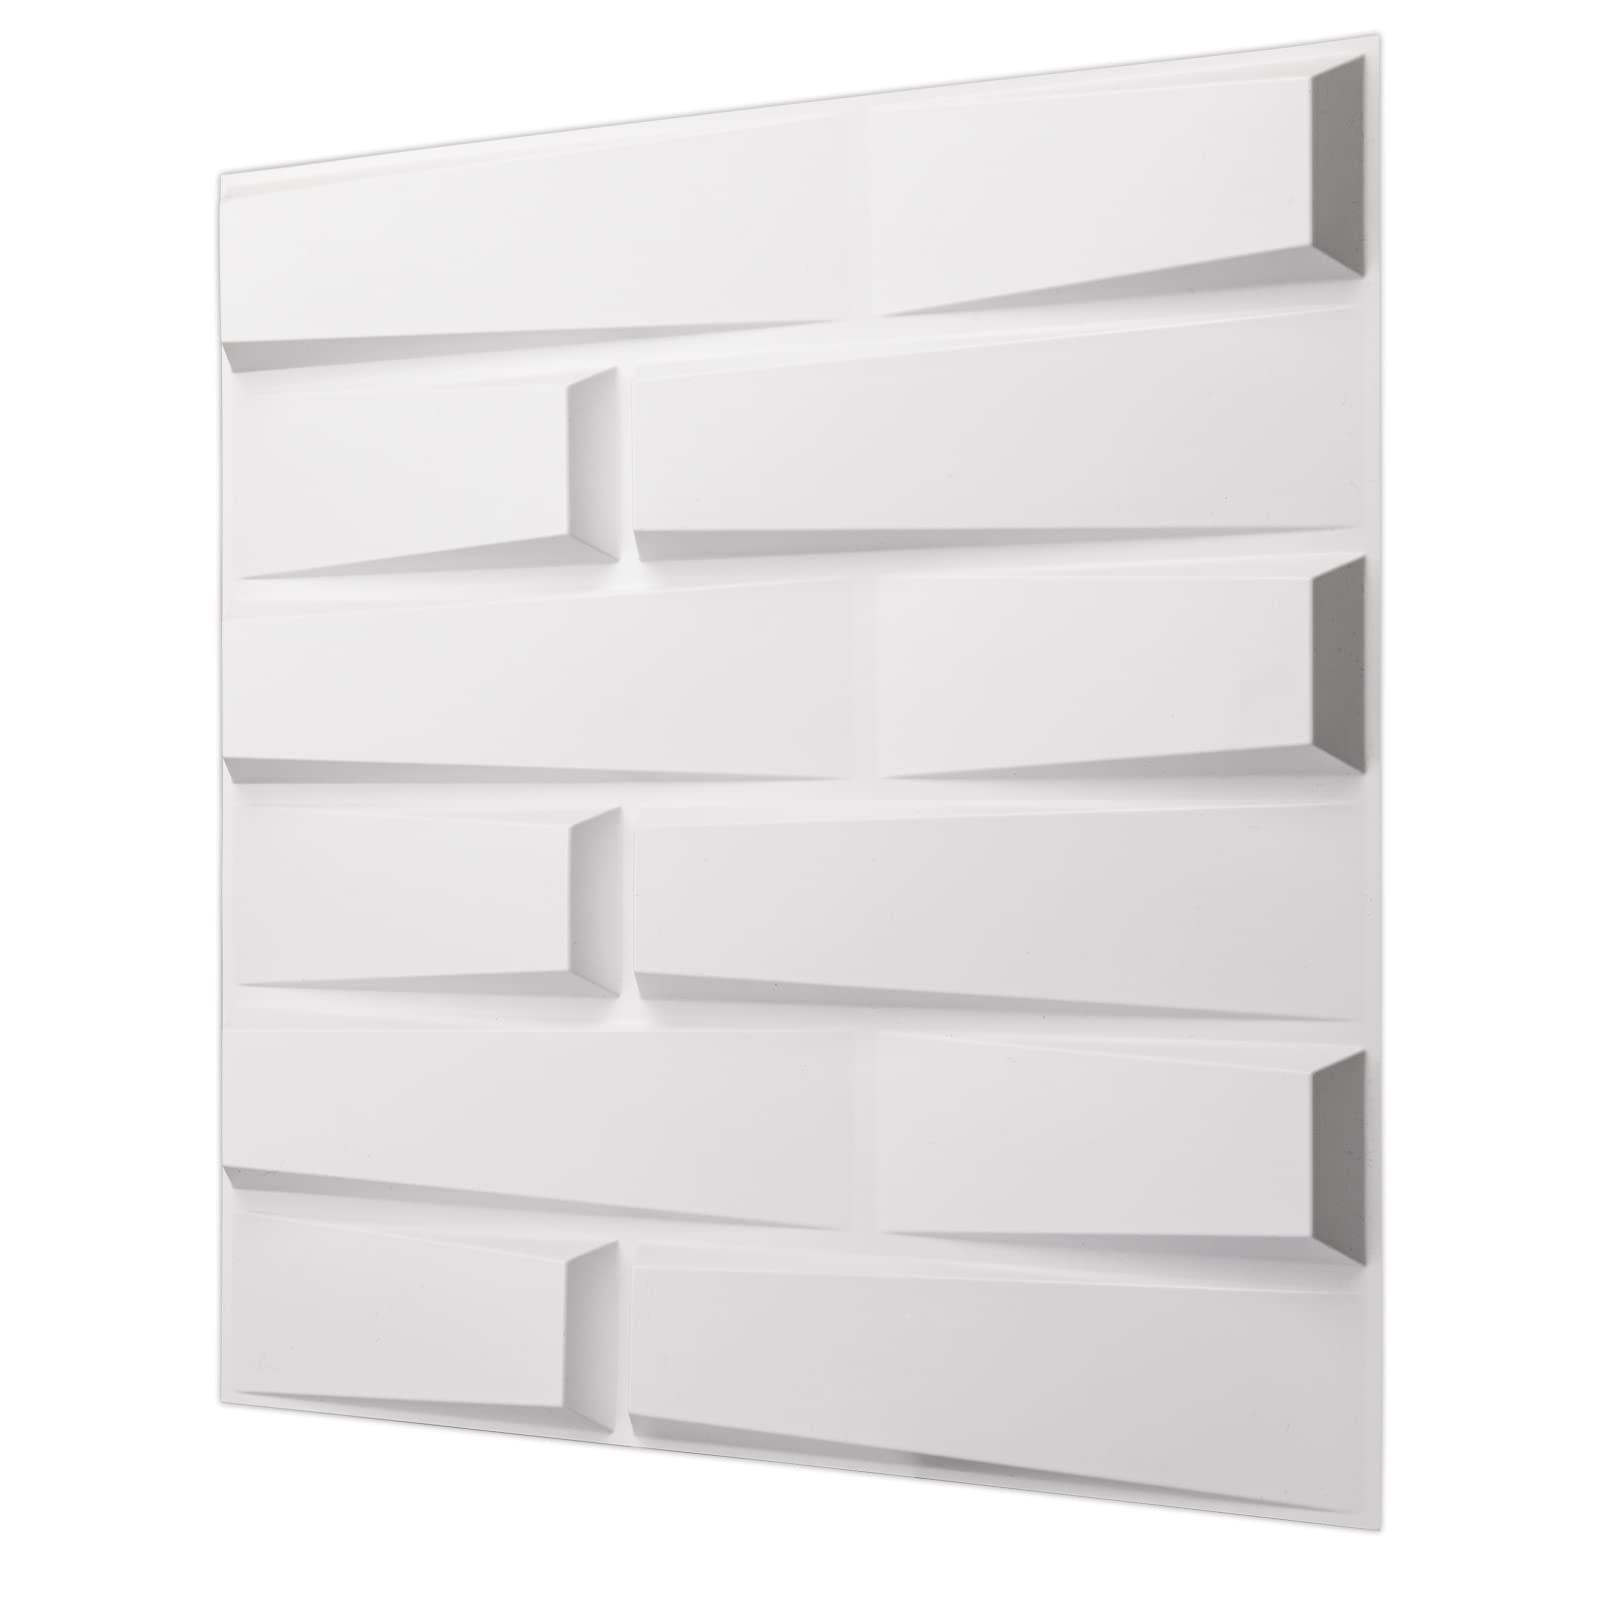 Art3d Decorative 3D PVC Wall Panel for Interior Décor, 12-Pack 19.7 x 19.7 in. White